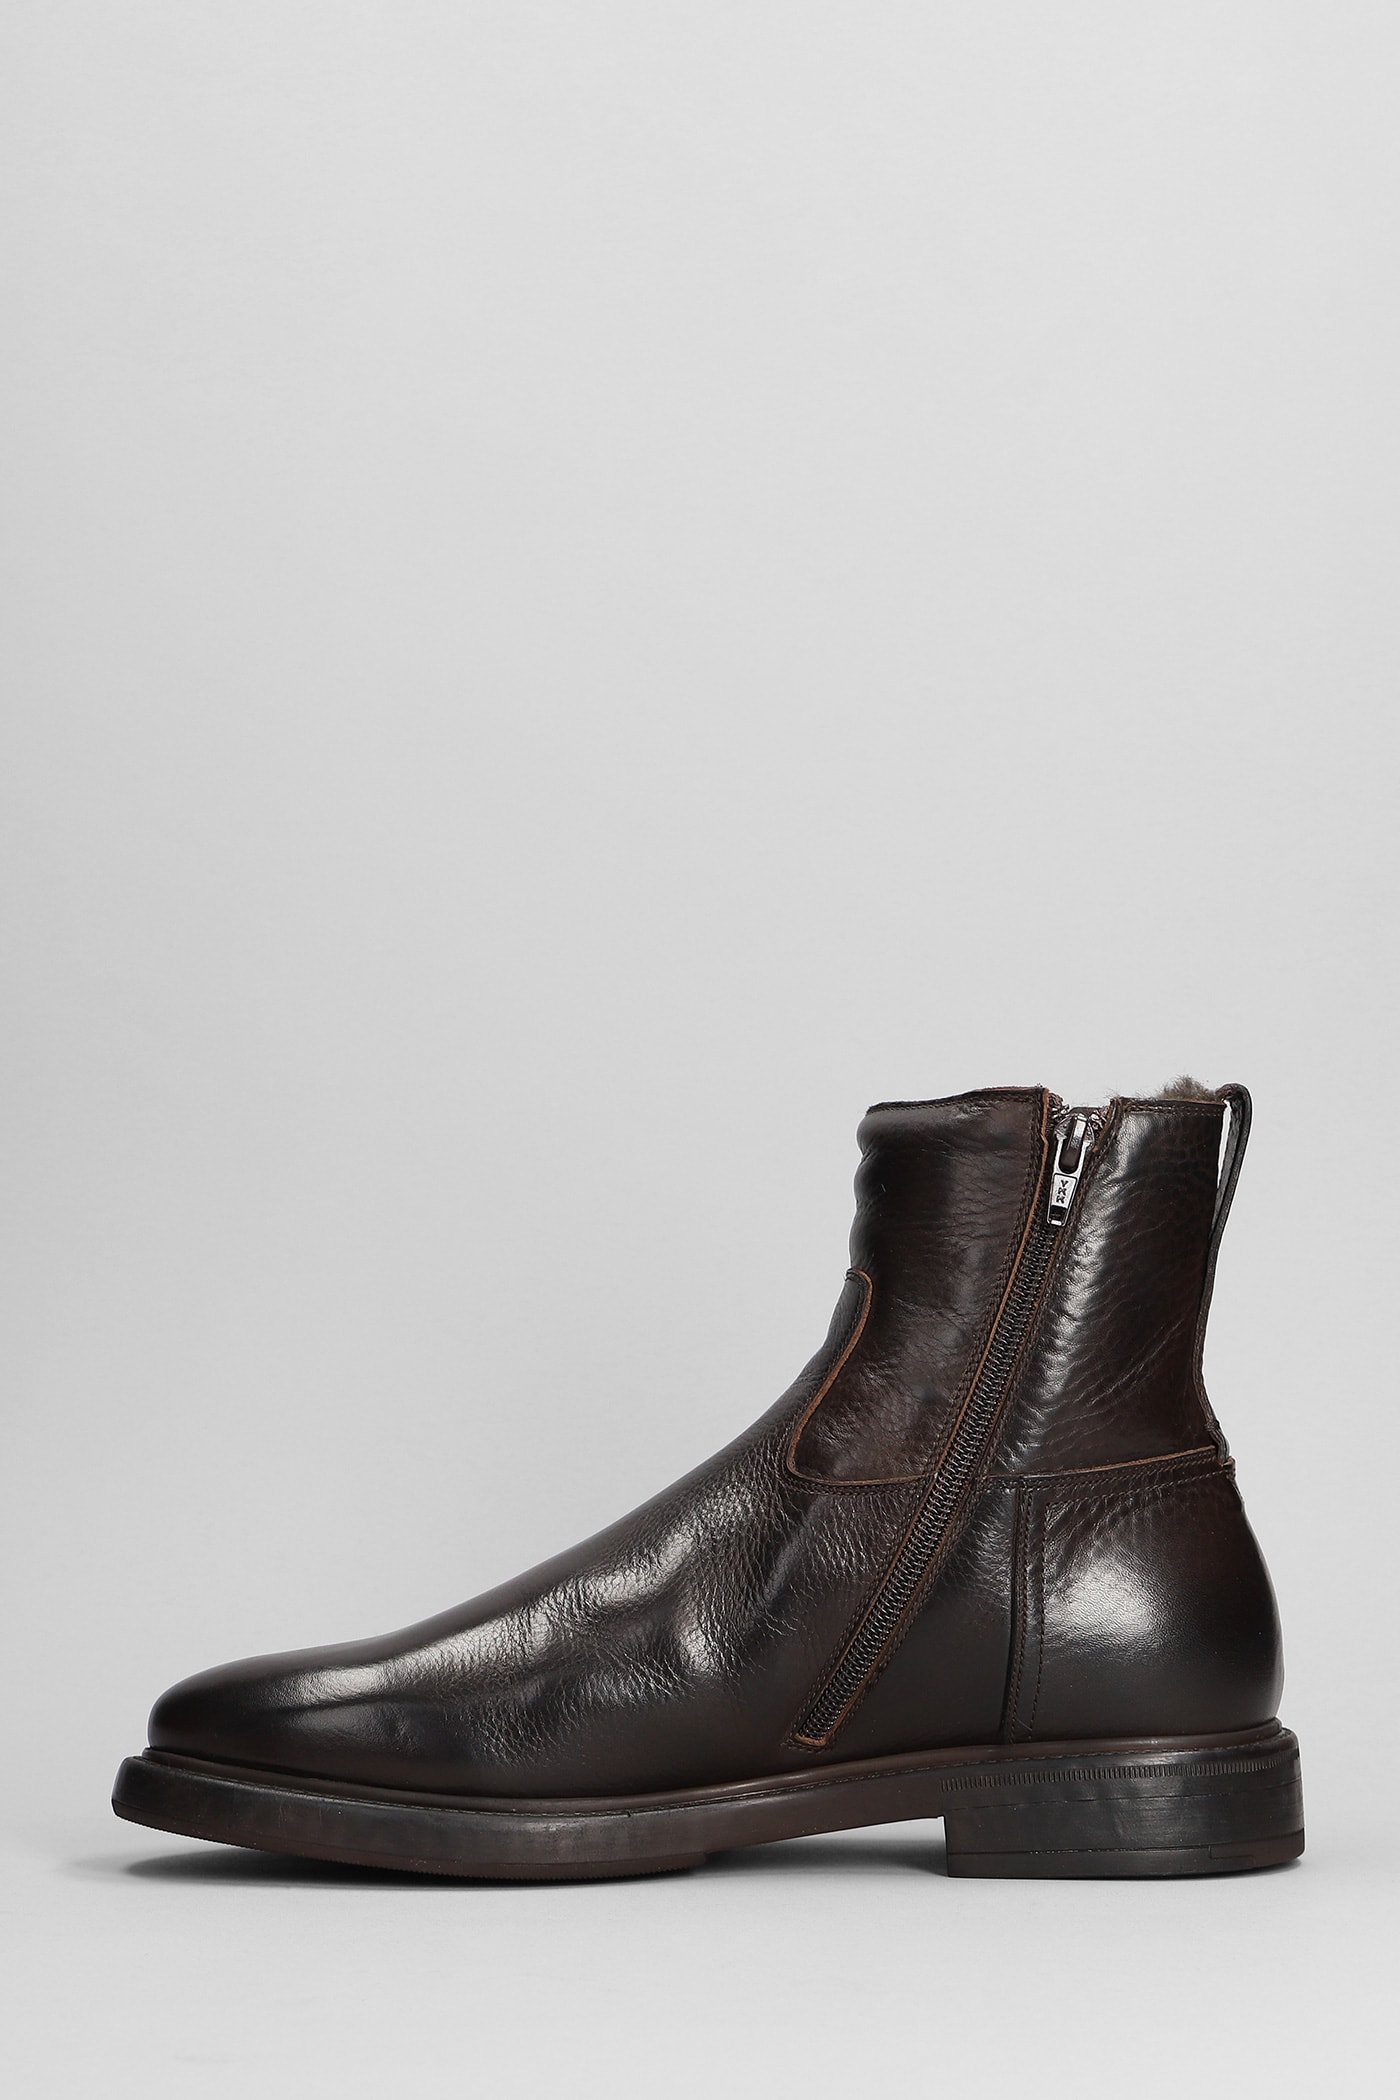 Shop Silvano Sassetti Low Heels Ankle Boots In Dark Brown Leather